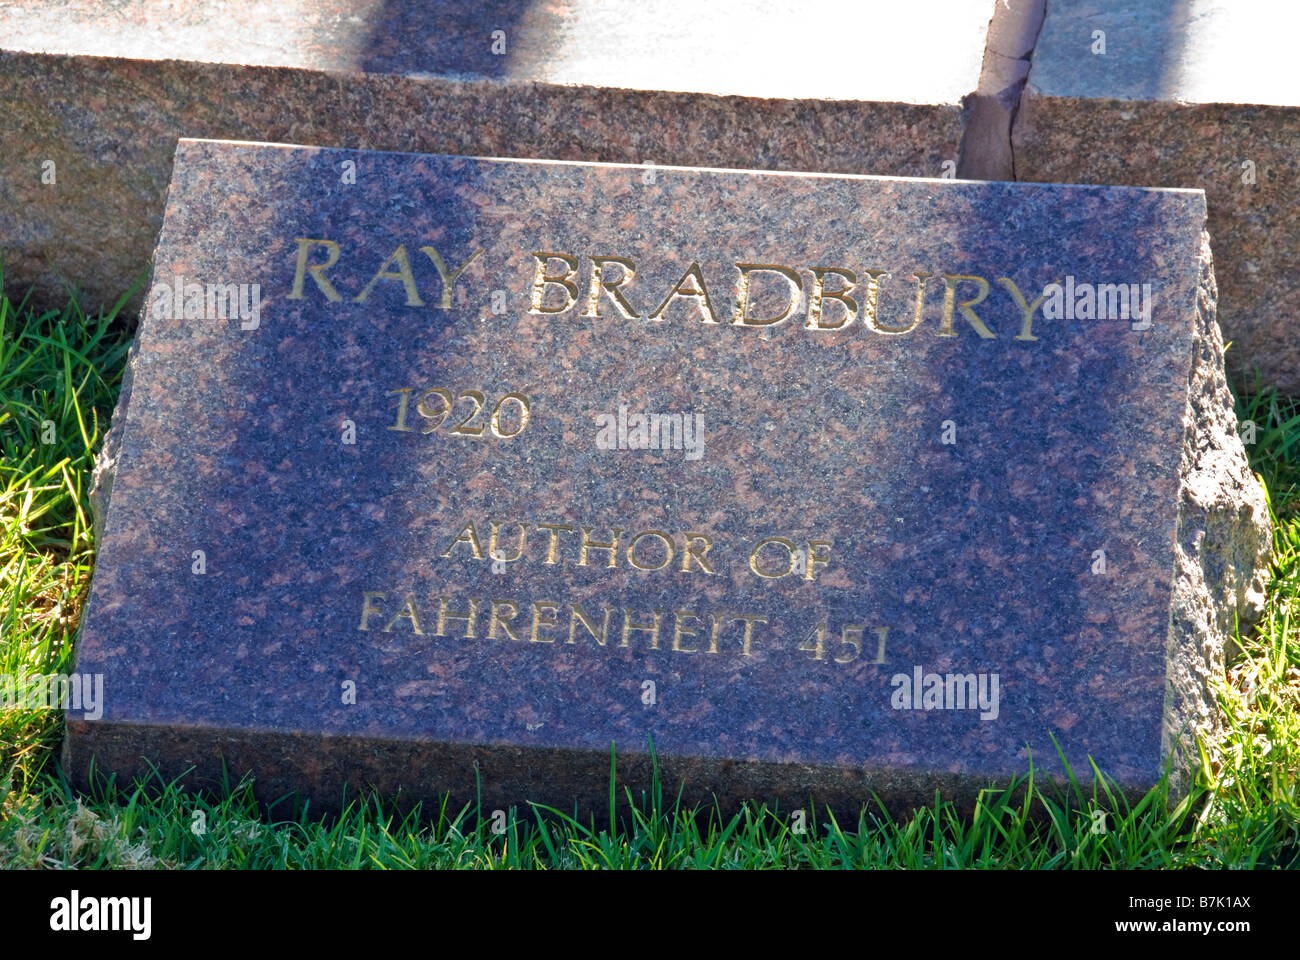 Ray Bradbury Hollywood Celebrity Graves Westwood Memorial Park Los Angeles CA cemetery Mortuary final resting place Stock Photo